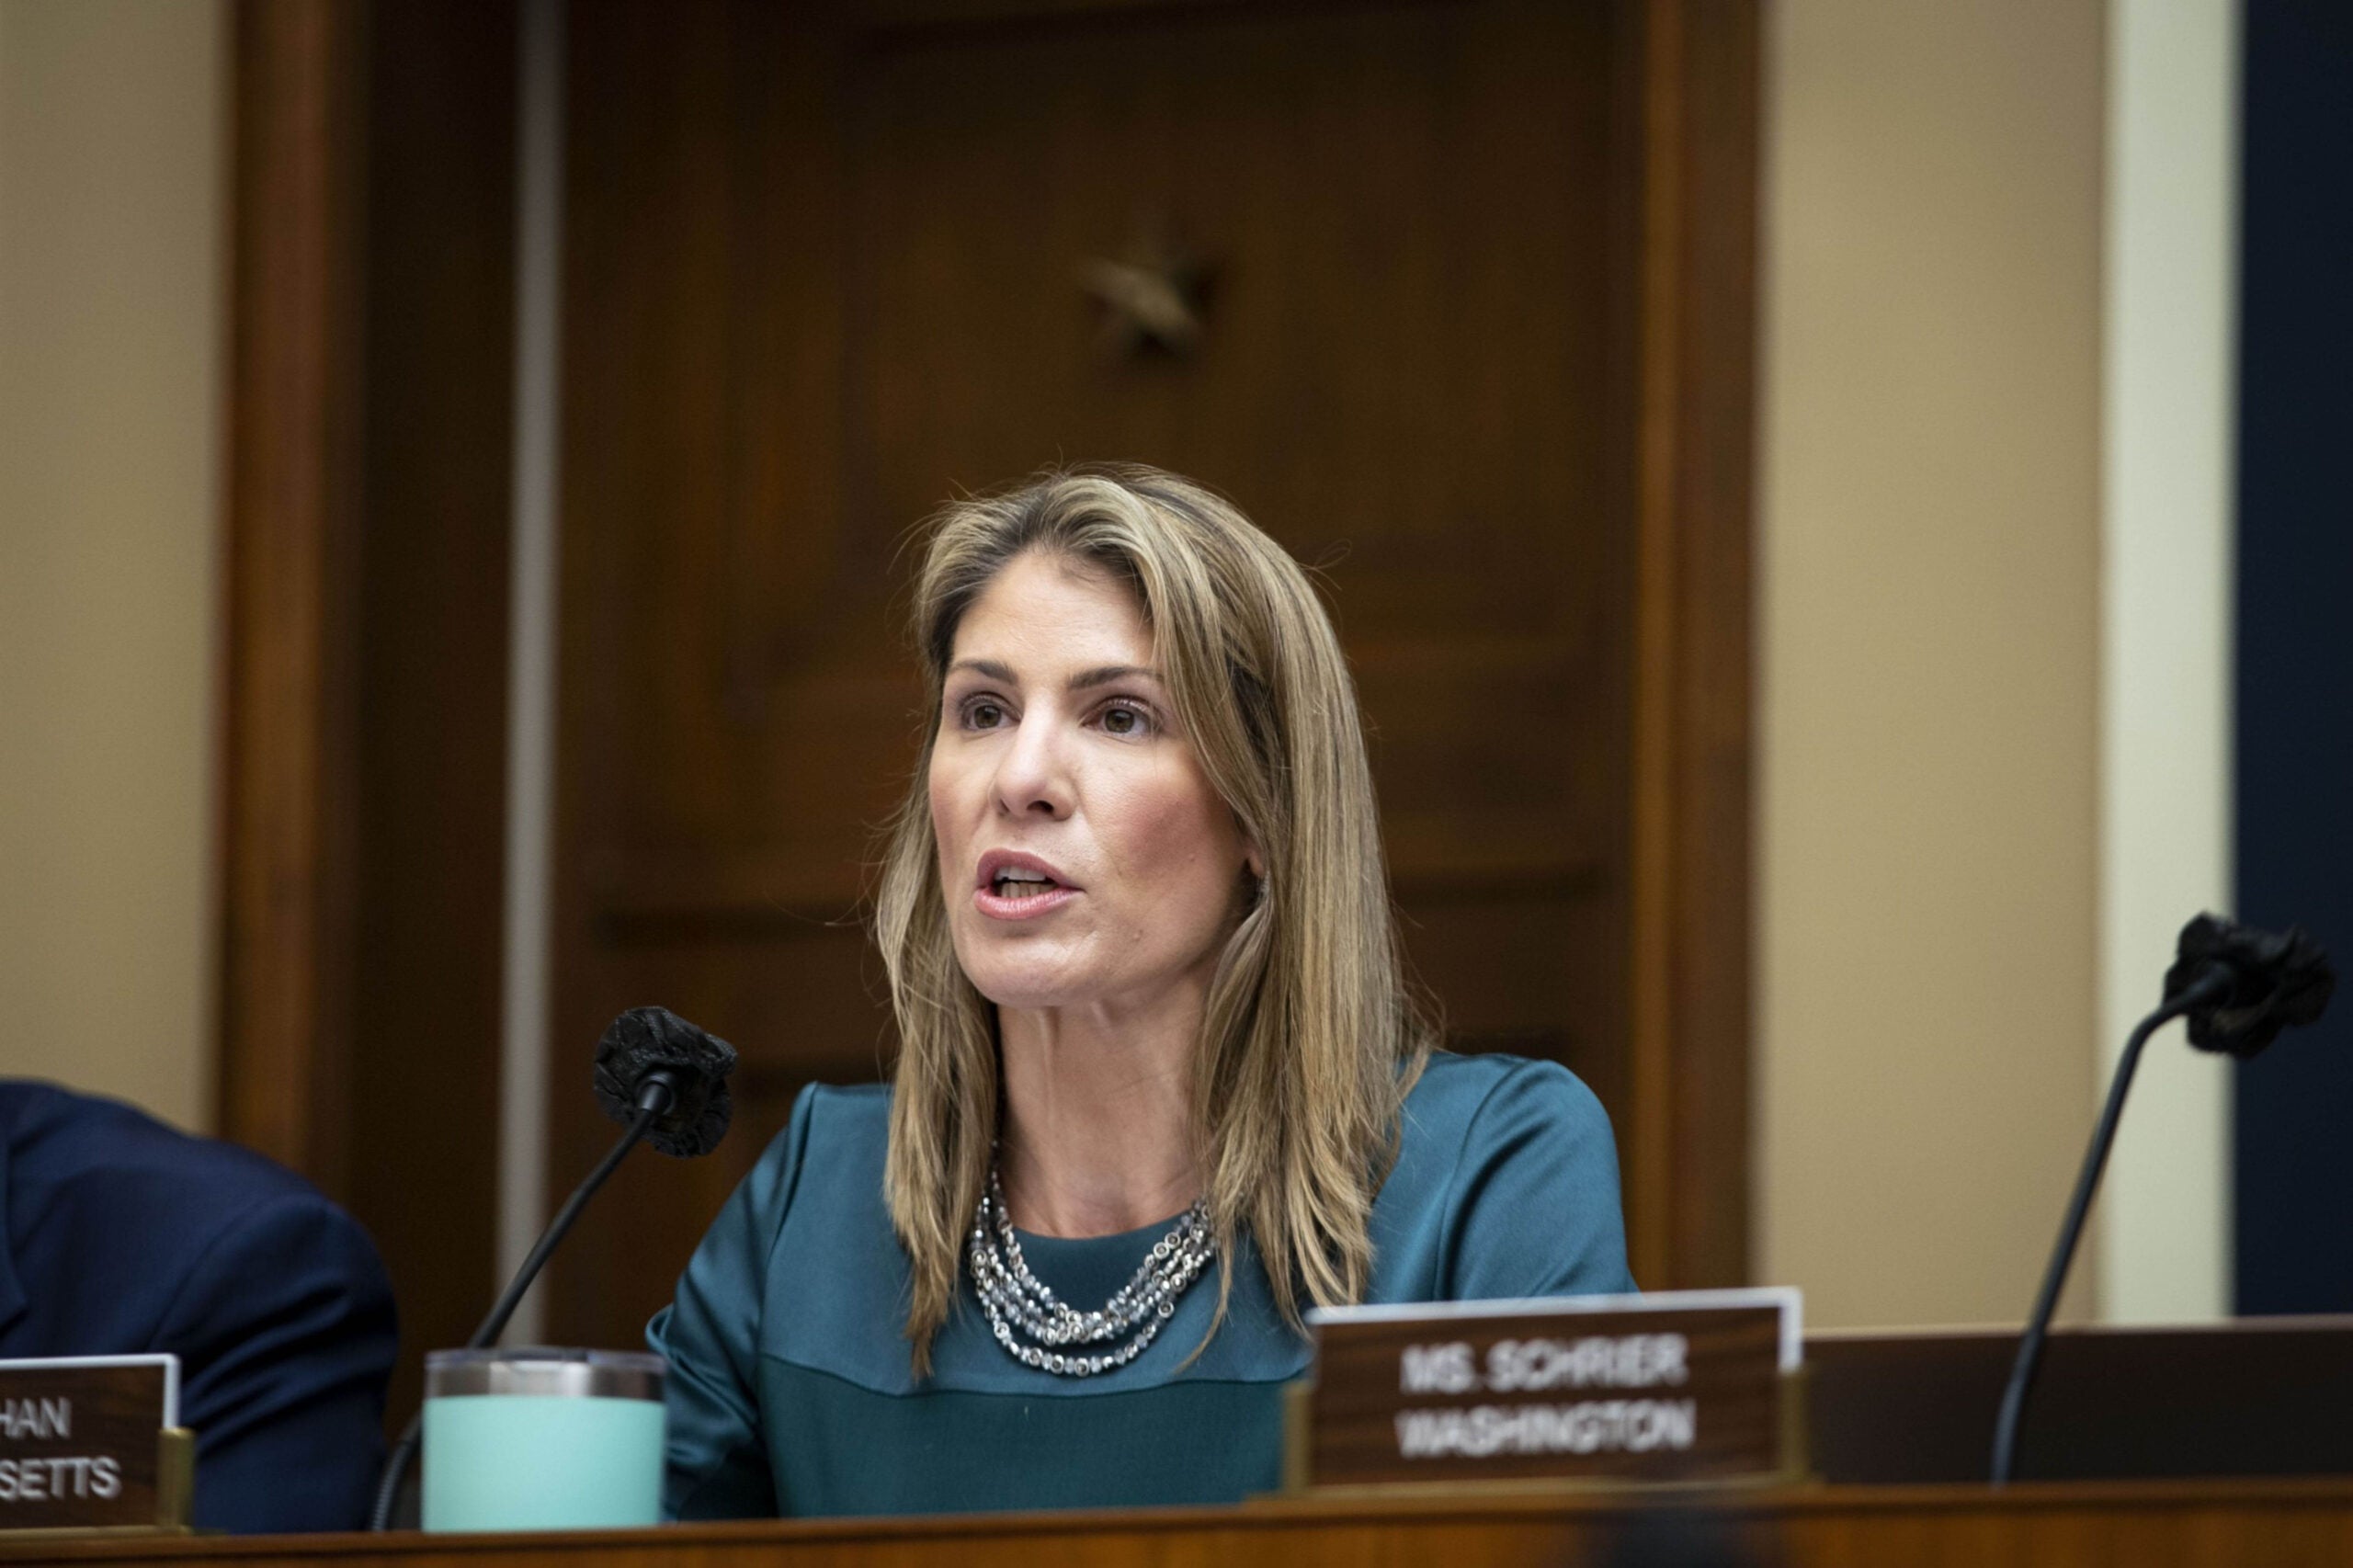 Rep. Lori Trahan, D-Mass., speaks during a House Energy and Commerce Subcommittee in Washington, D.C., on April 6.